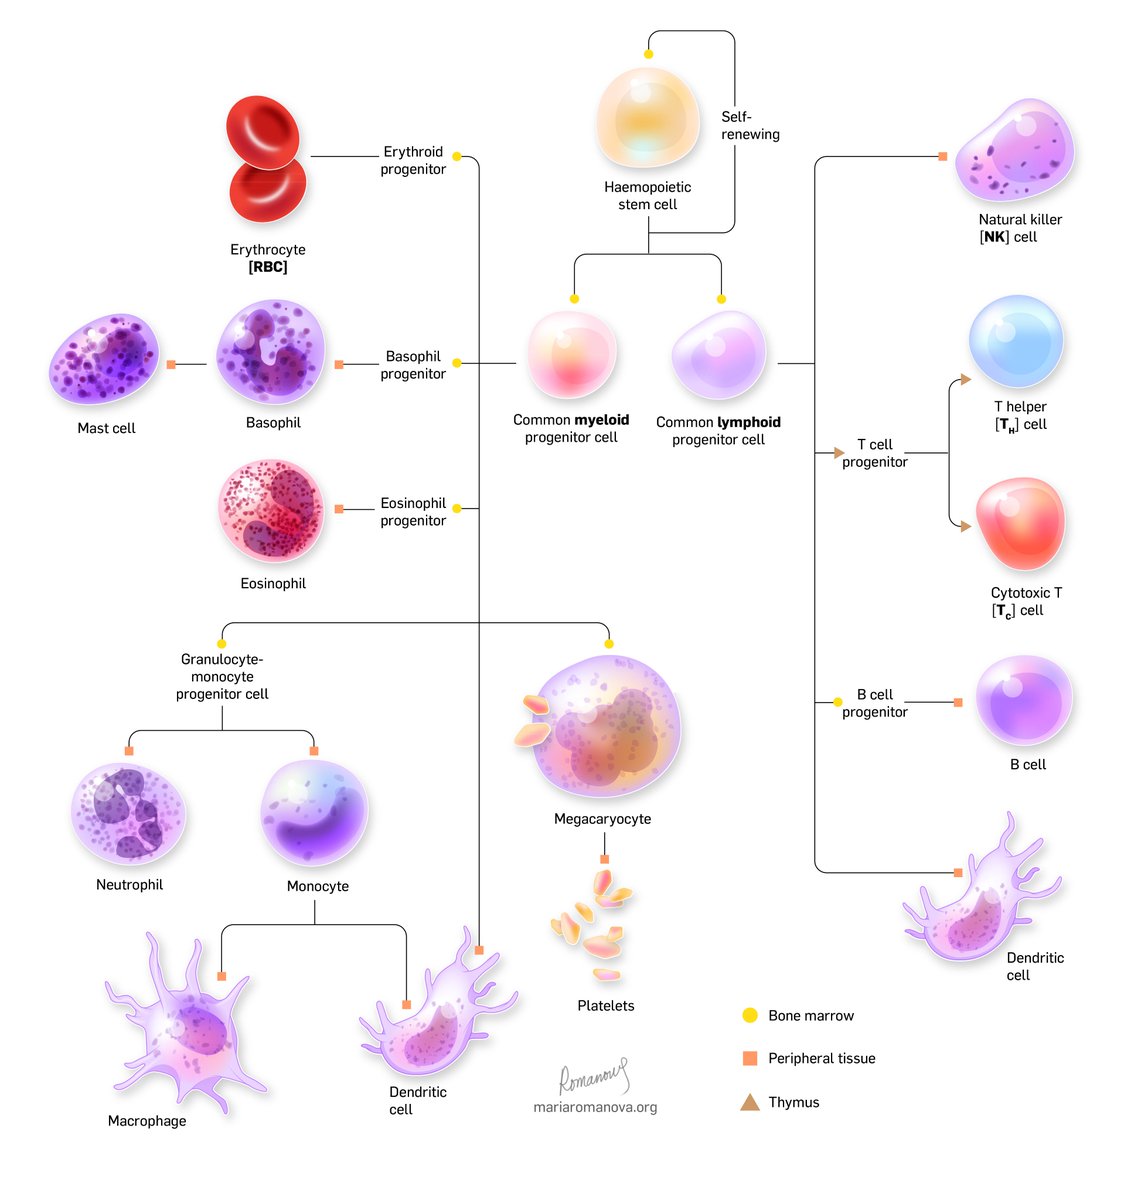 This one is finished! #immunology #hematopoiesis #Tcell #bloodcell #celldifferentiation #diagram